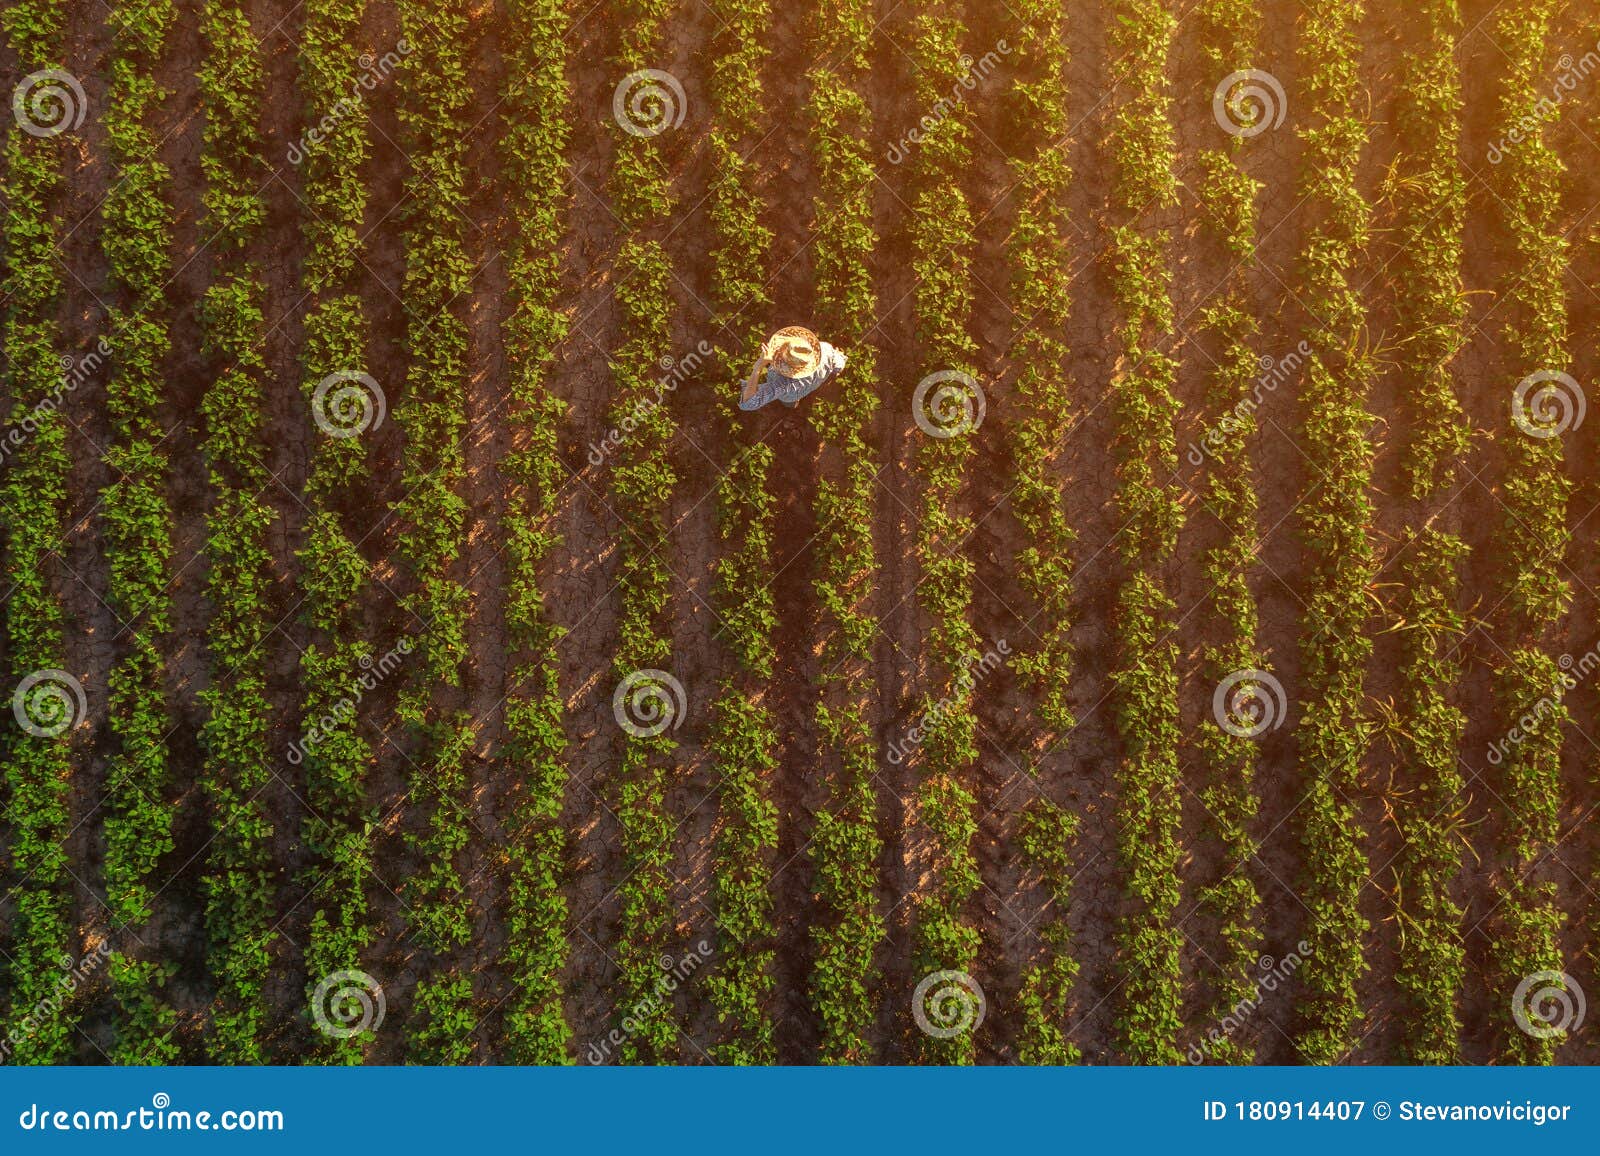 Soybean Farmer in Field, Aerial View Stock Image - Image of cultivated